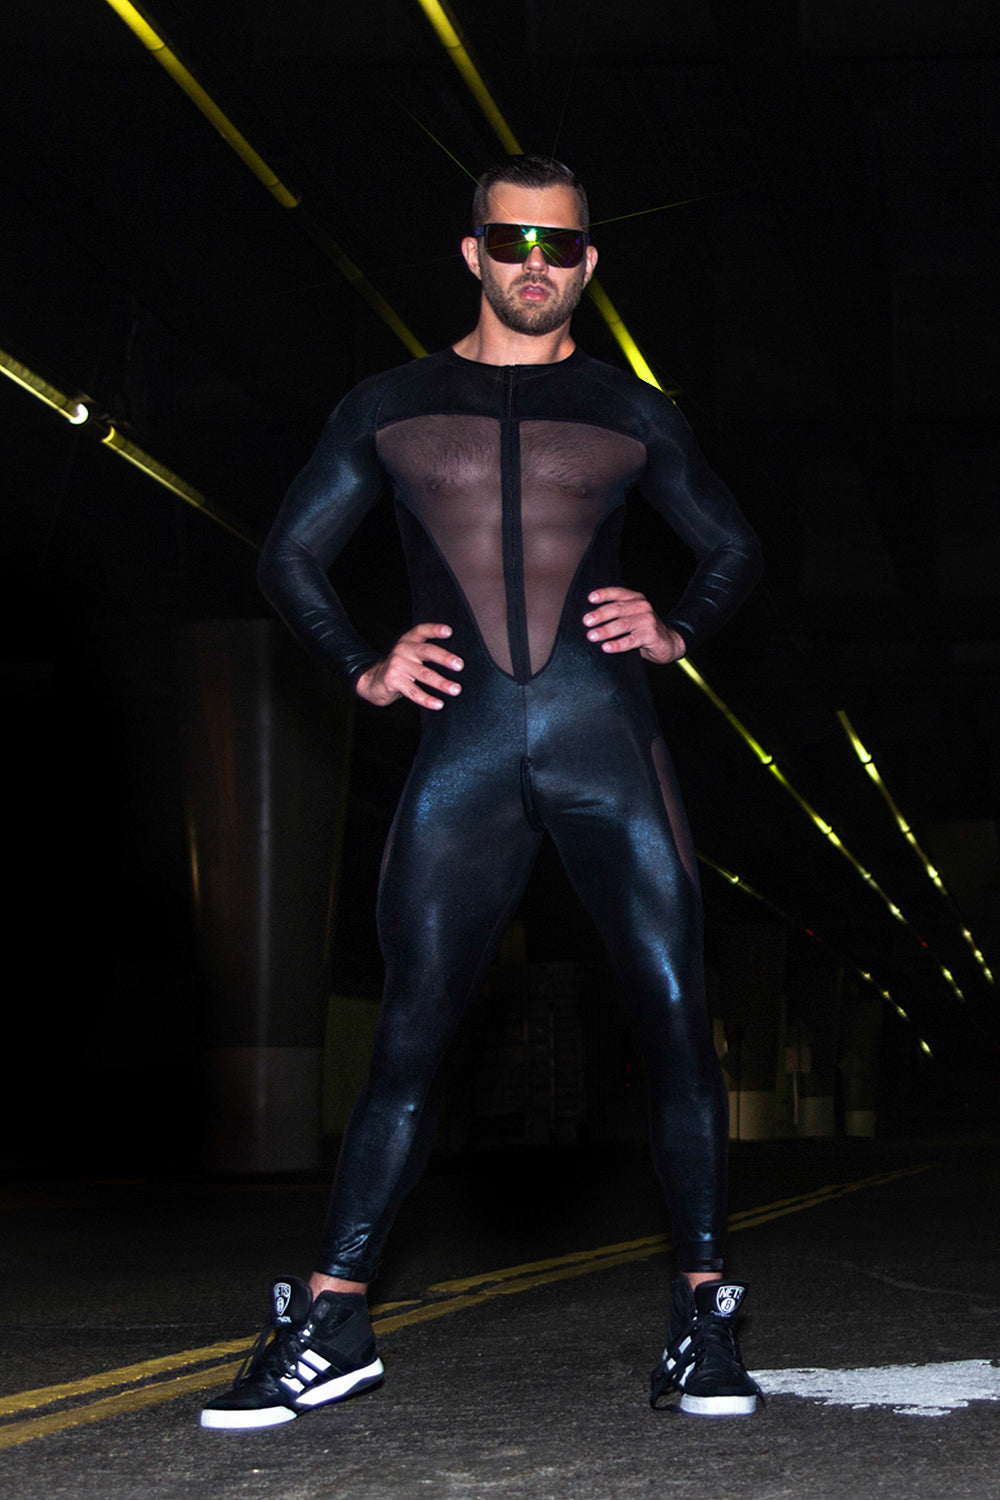 Titan Suit Reduced to 164.00!!! - Slick It Up 